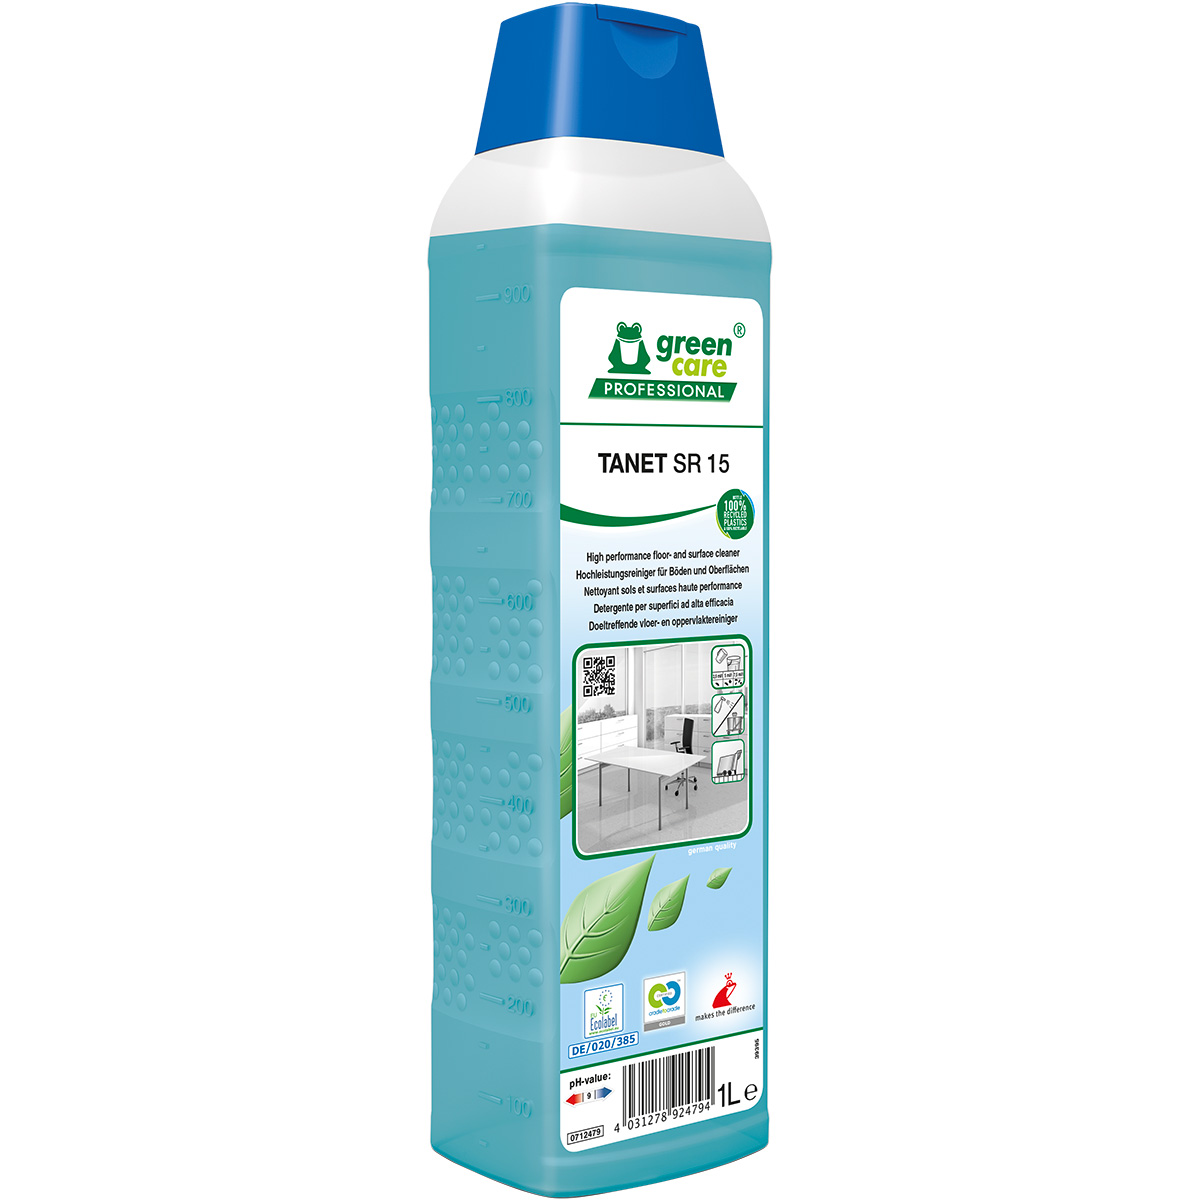 Green Care TANET SR15 high performance cleaner